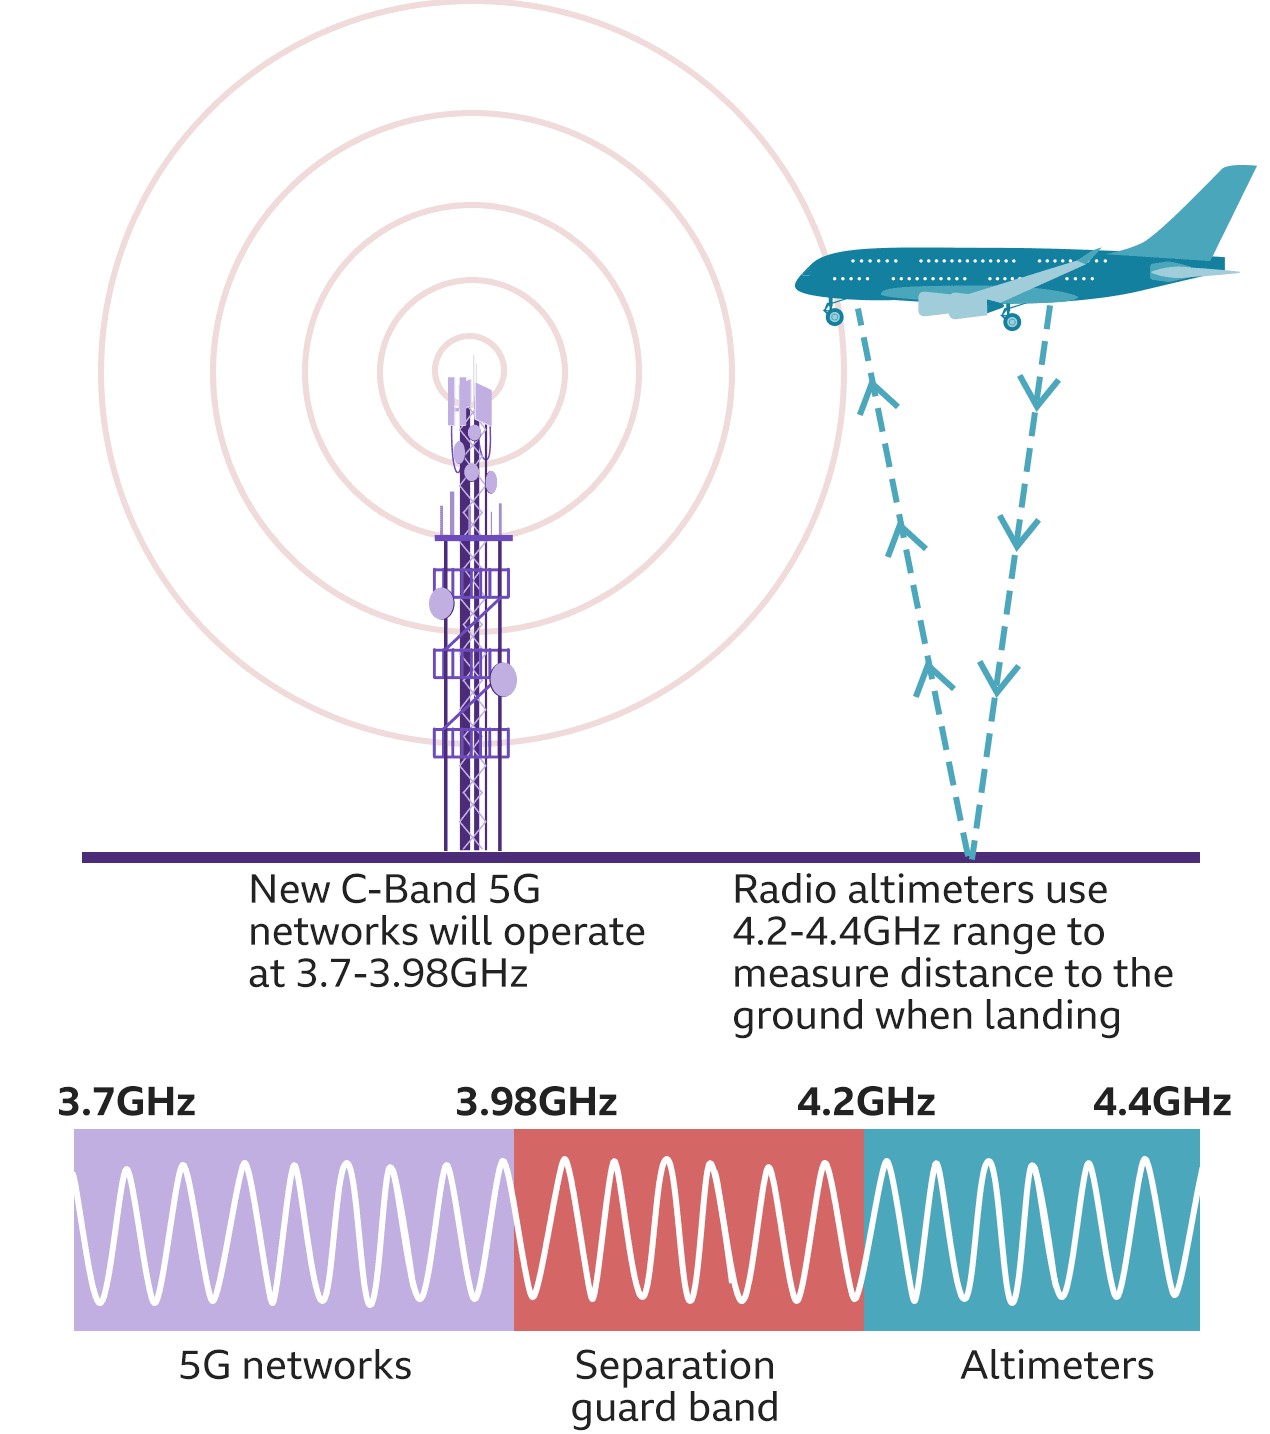 New C-band 5G spectrum range compared to band used by aircraft radio altimeters